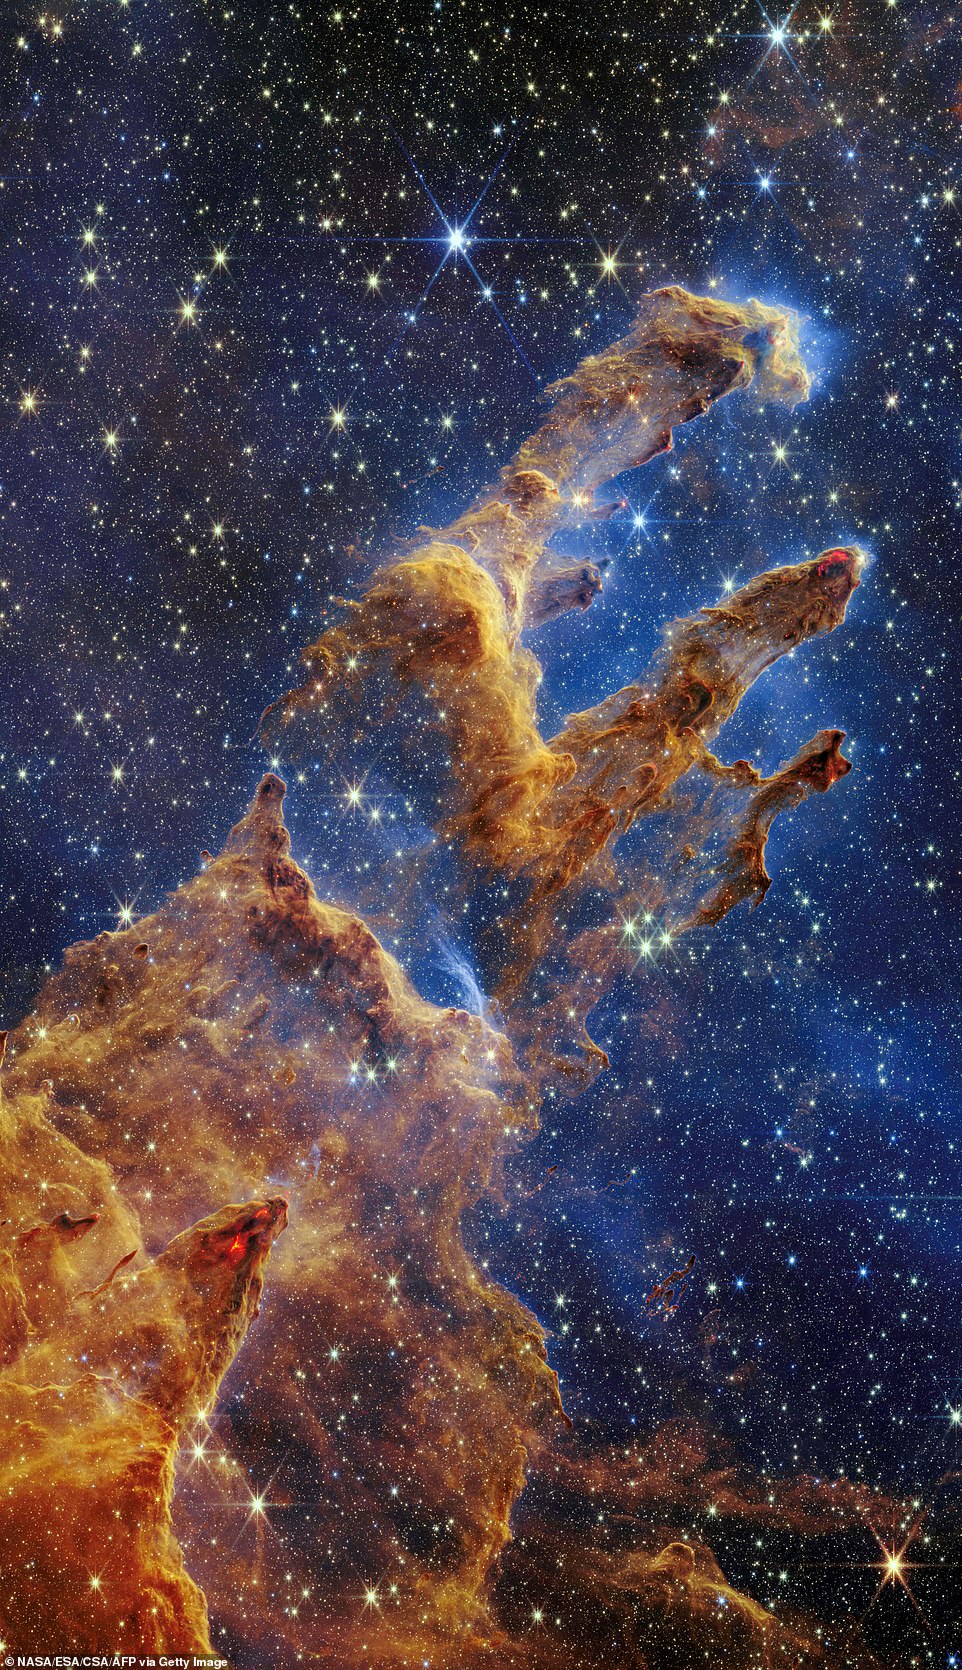 Reaching for the stars: This detailed image of the iconic Pillars of Creation, reveals its columns of cool interstellar gas and dust surrounded by countless twinkling stars. This is the first time the gas and dust can be seen clumping together and populations of forming stars, with some still encased in dust, are visible